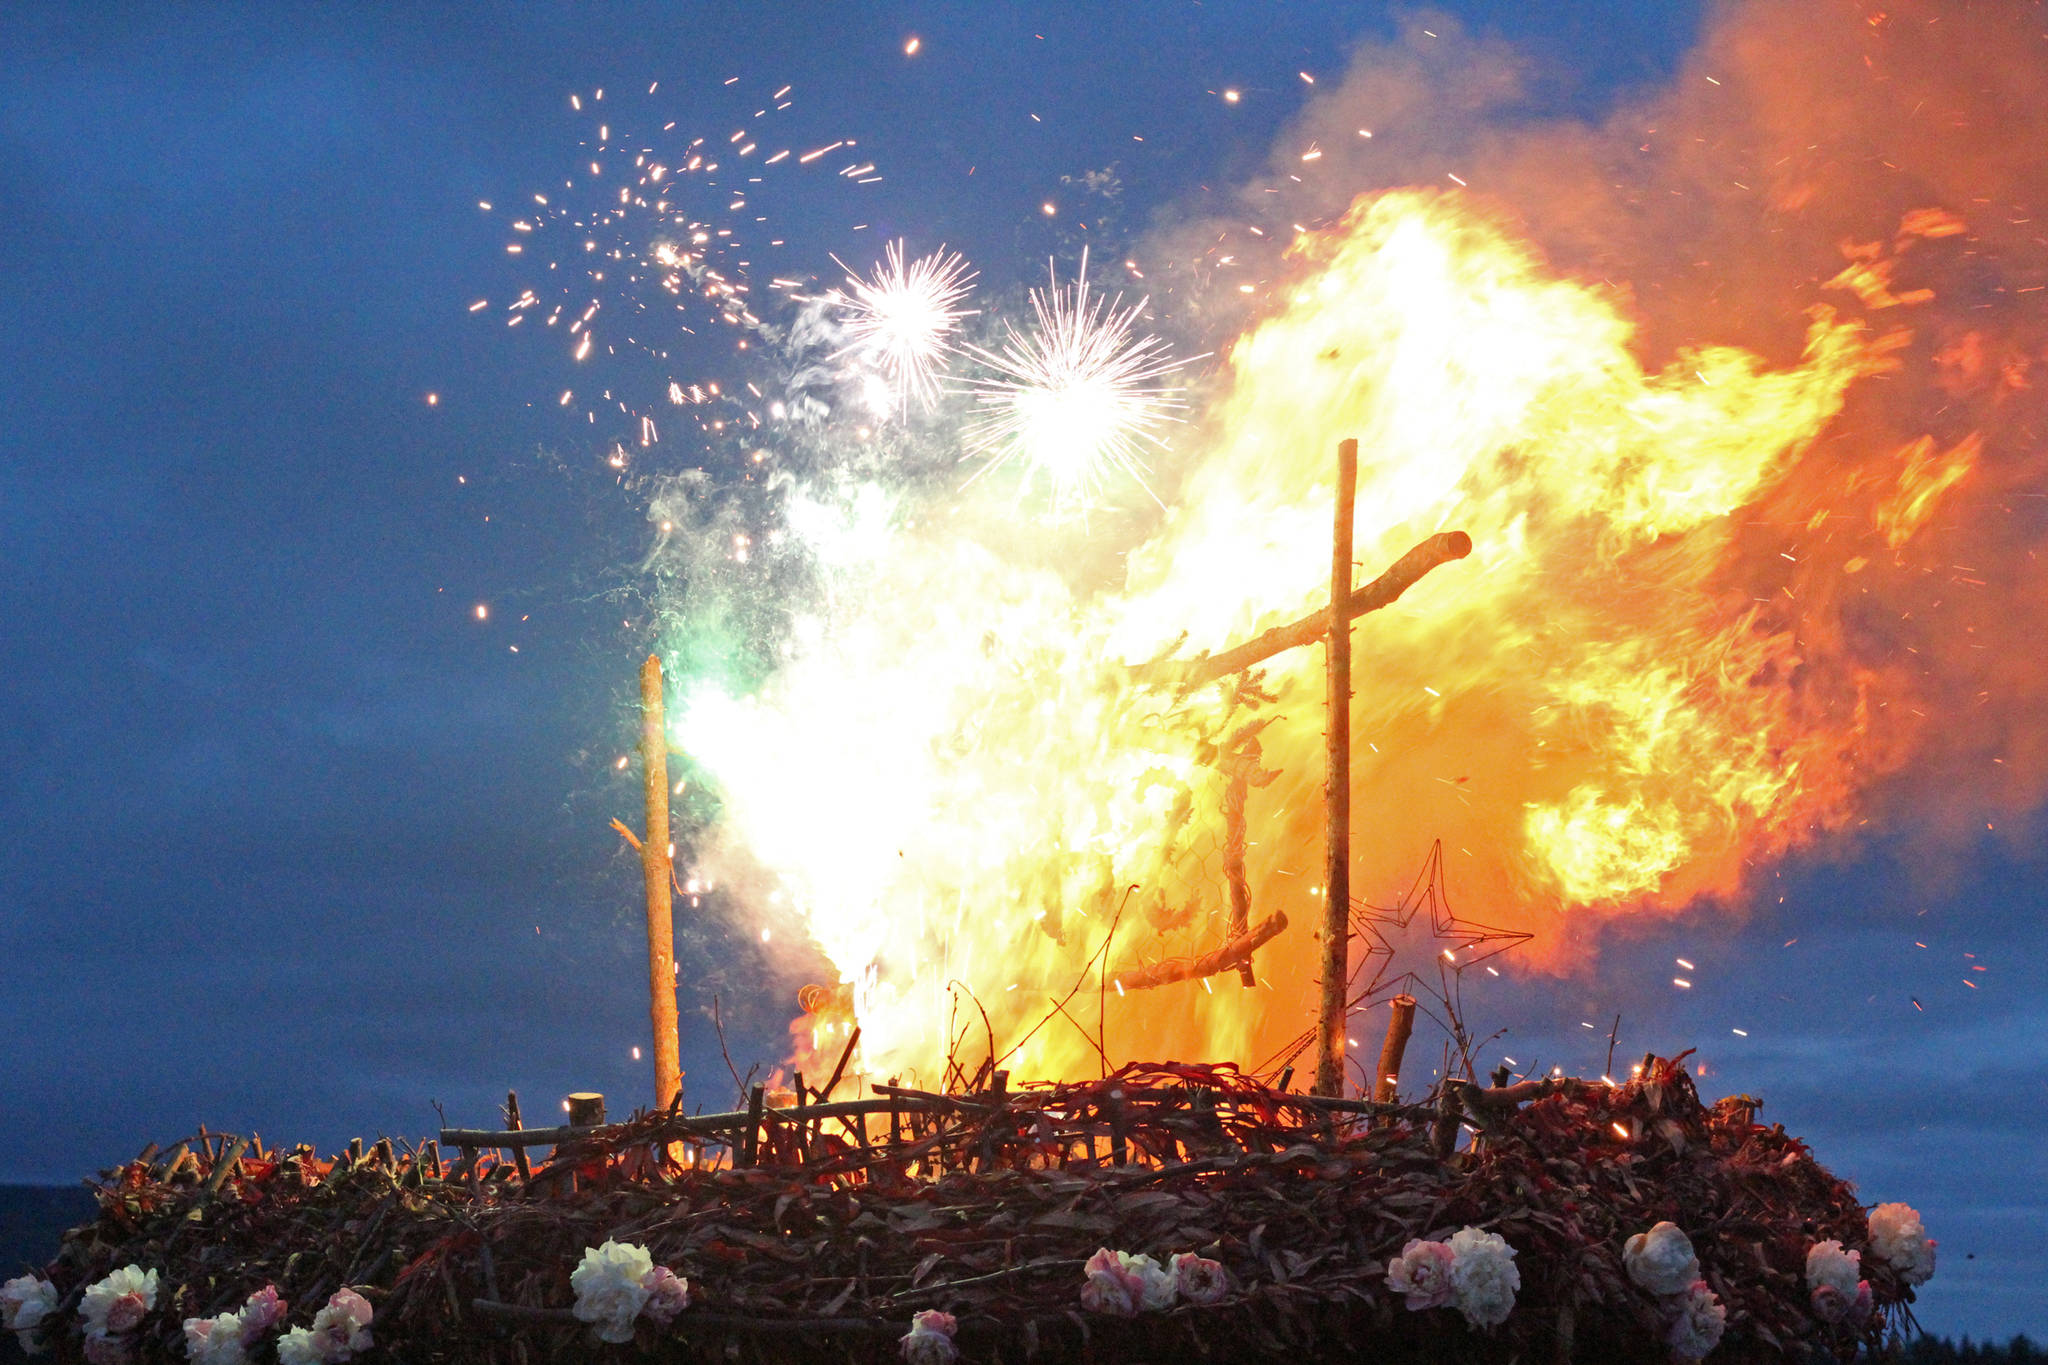 Fireworks explode on top of this year’s Burning Basket Project while it burns in a celebratory ceremony Sunday, Sept. 10, 2017 at Mariner Park in Homer, Alaska. This year’s theme for the basket was “Shine.” (Photo by Megan Pacer/Homer News)